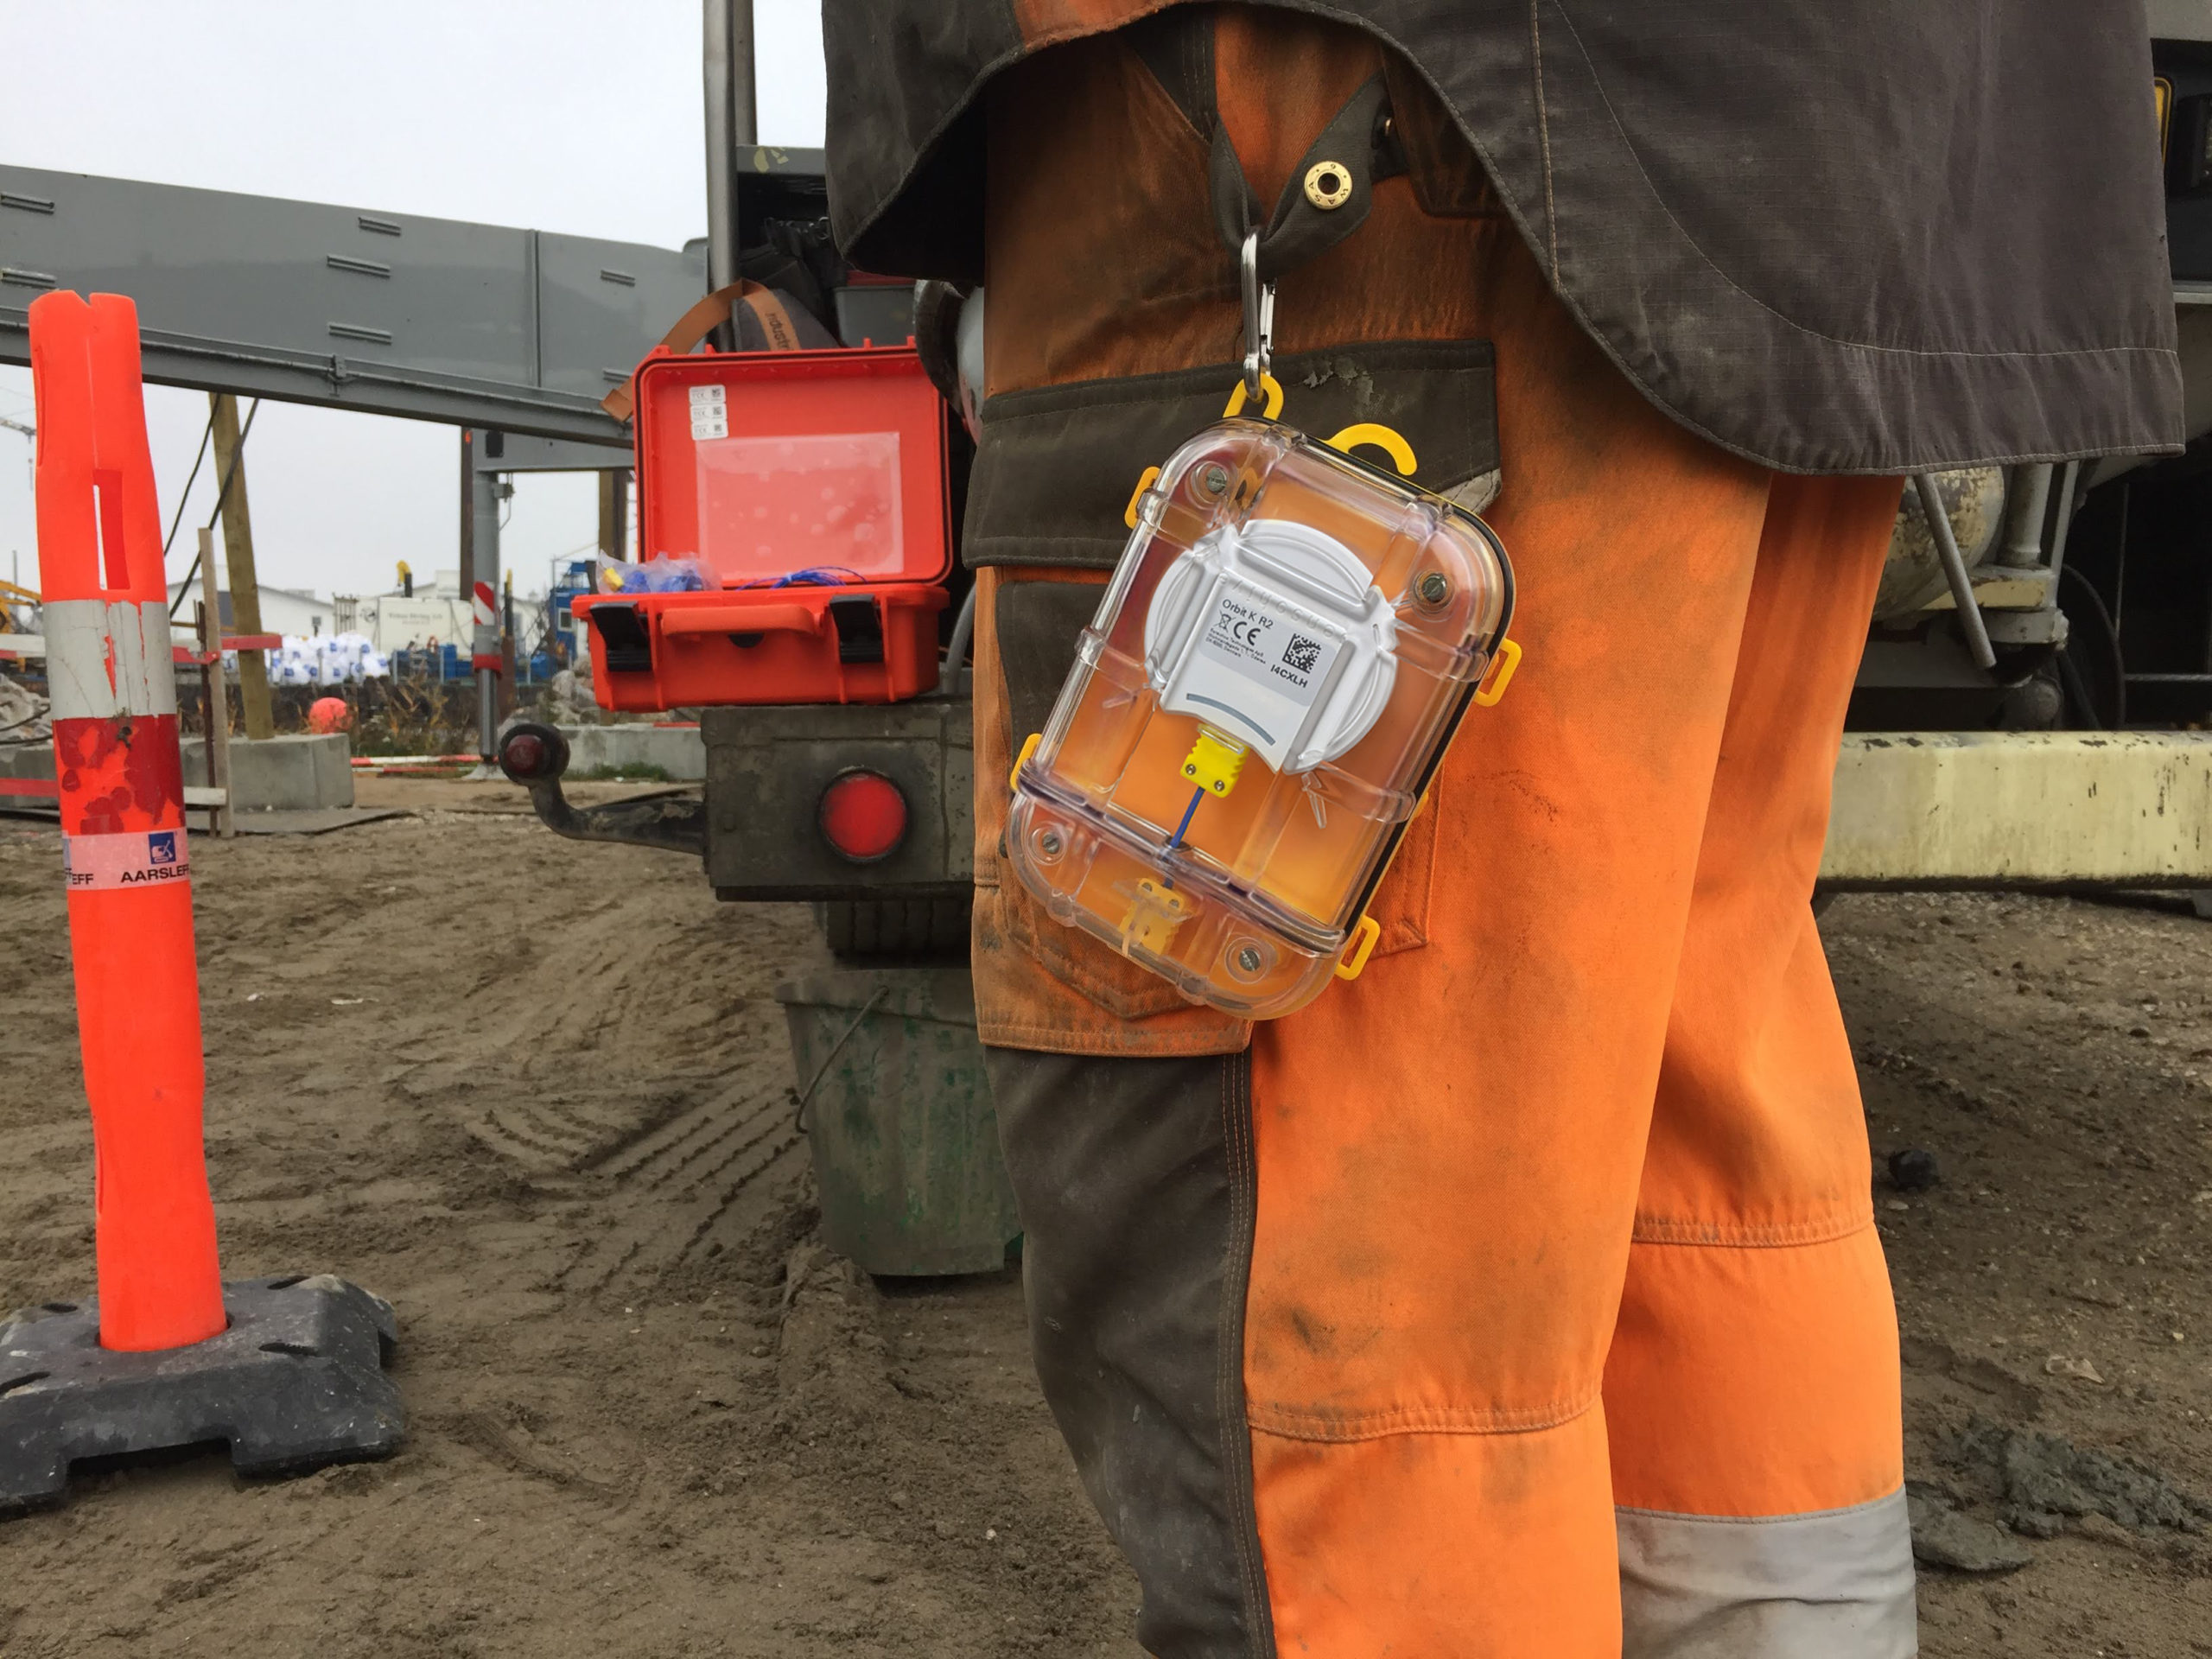 A Maturix Sensor is hanging off a construction worker's belt as the worker moves through a construction site.